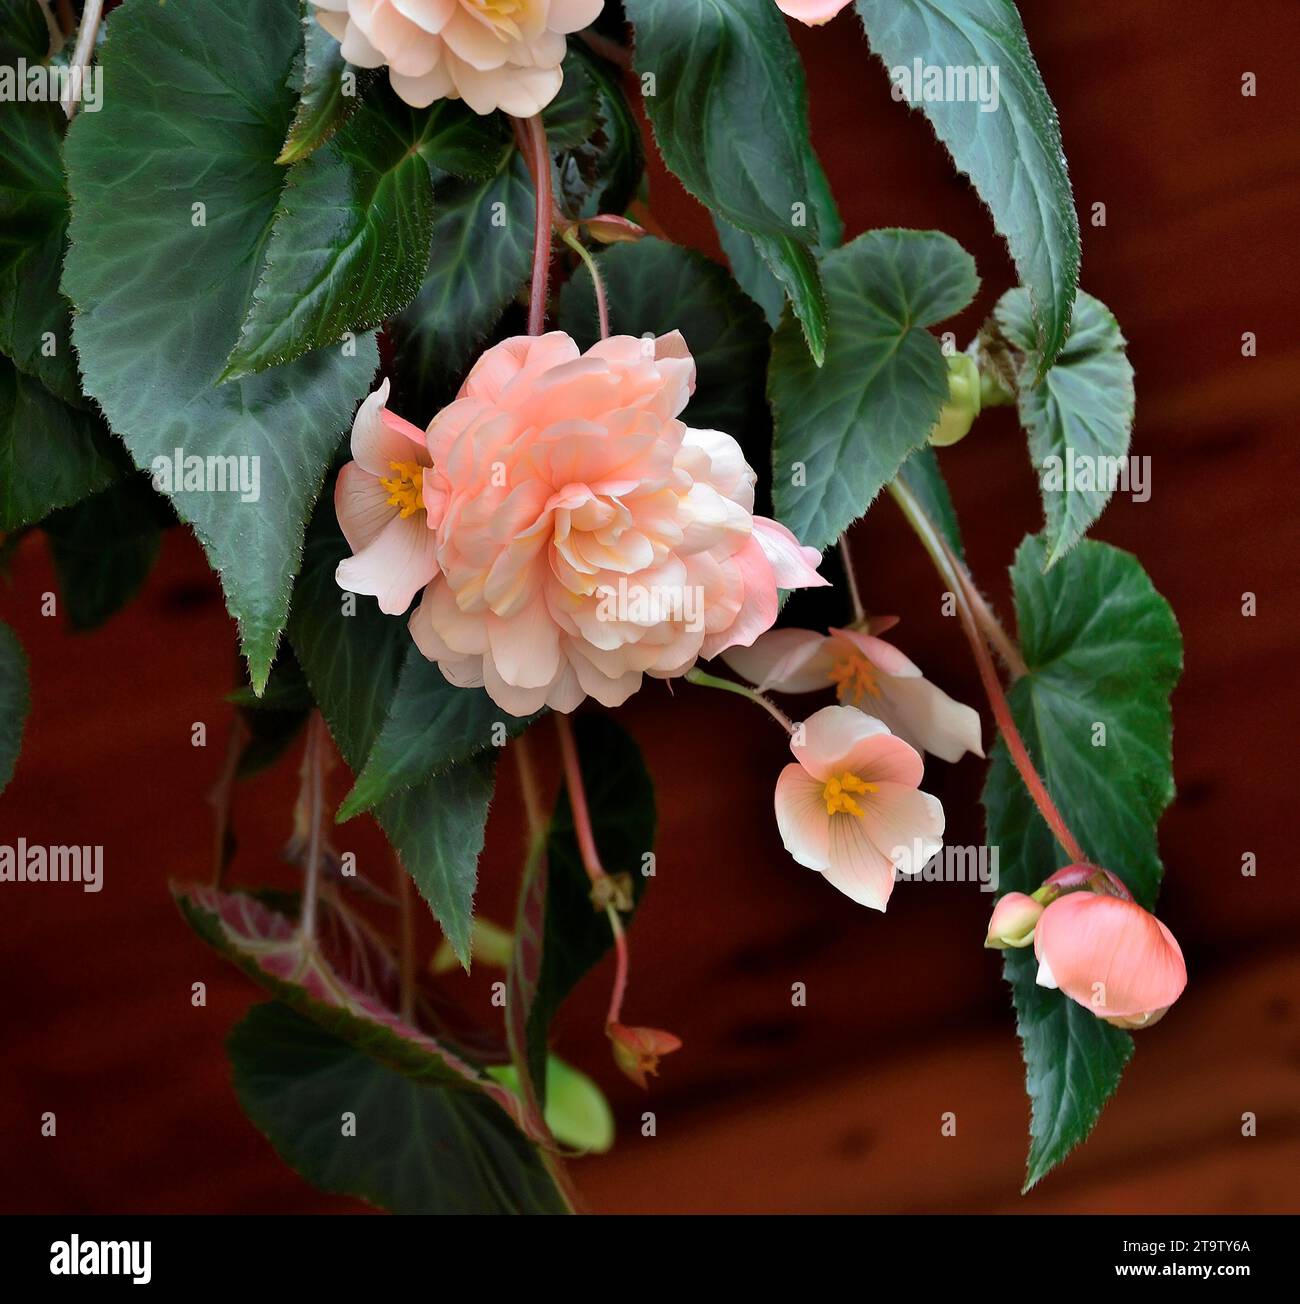 Ampelous root begonia with soft pink cream double flowers close-up. A delightfully delicate flowering ornamental begonia plant of Bellеconia Chardonna Stock Photo